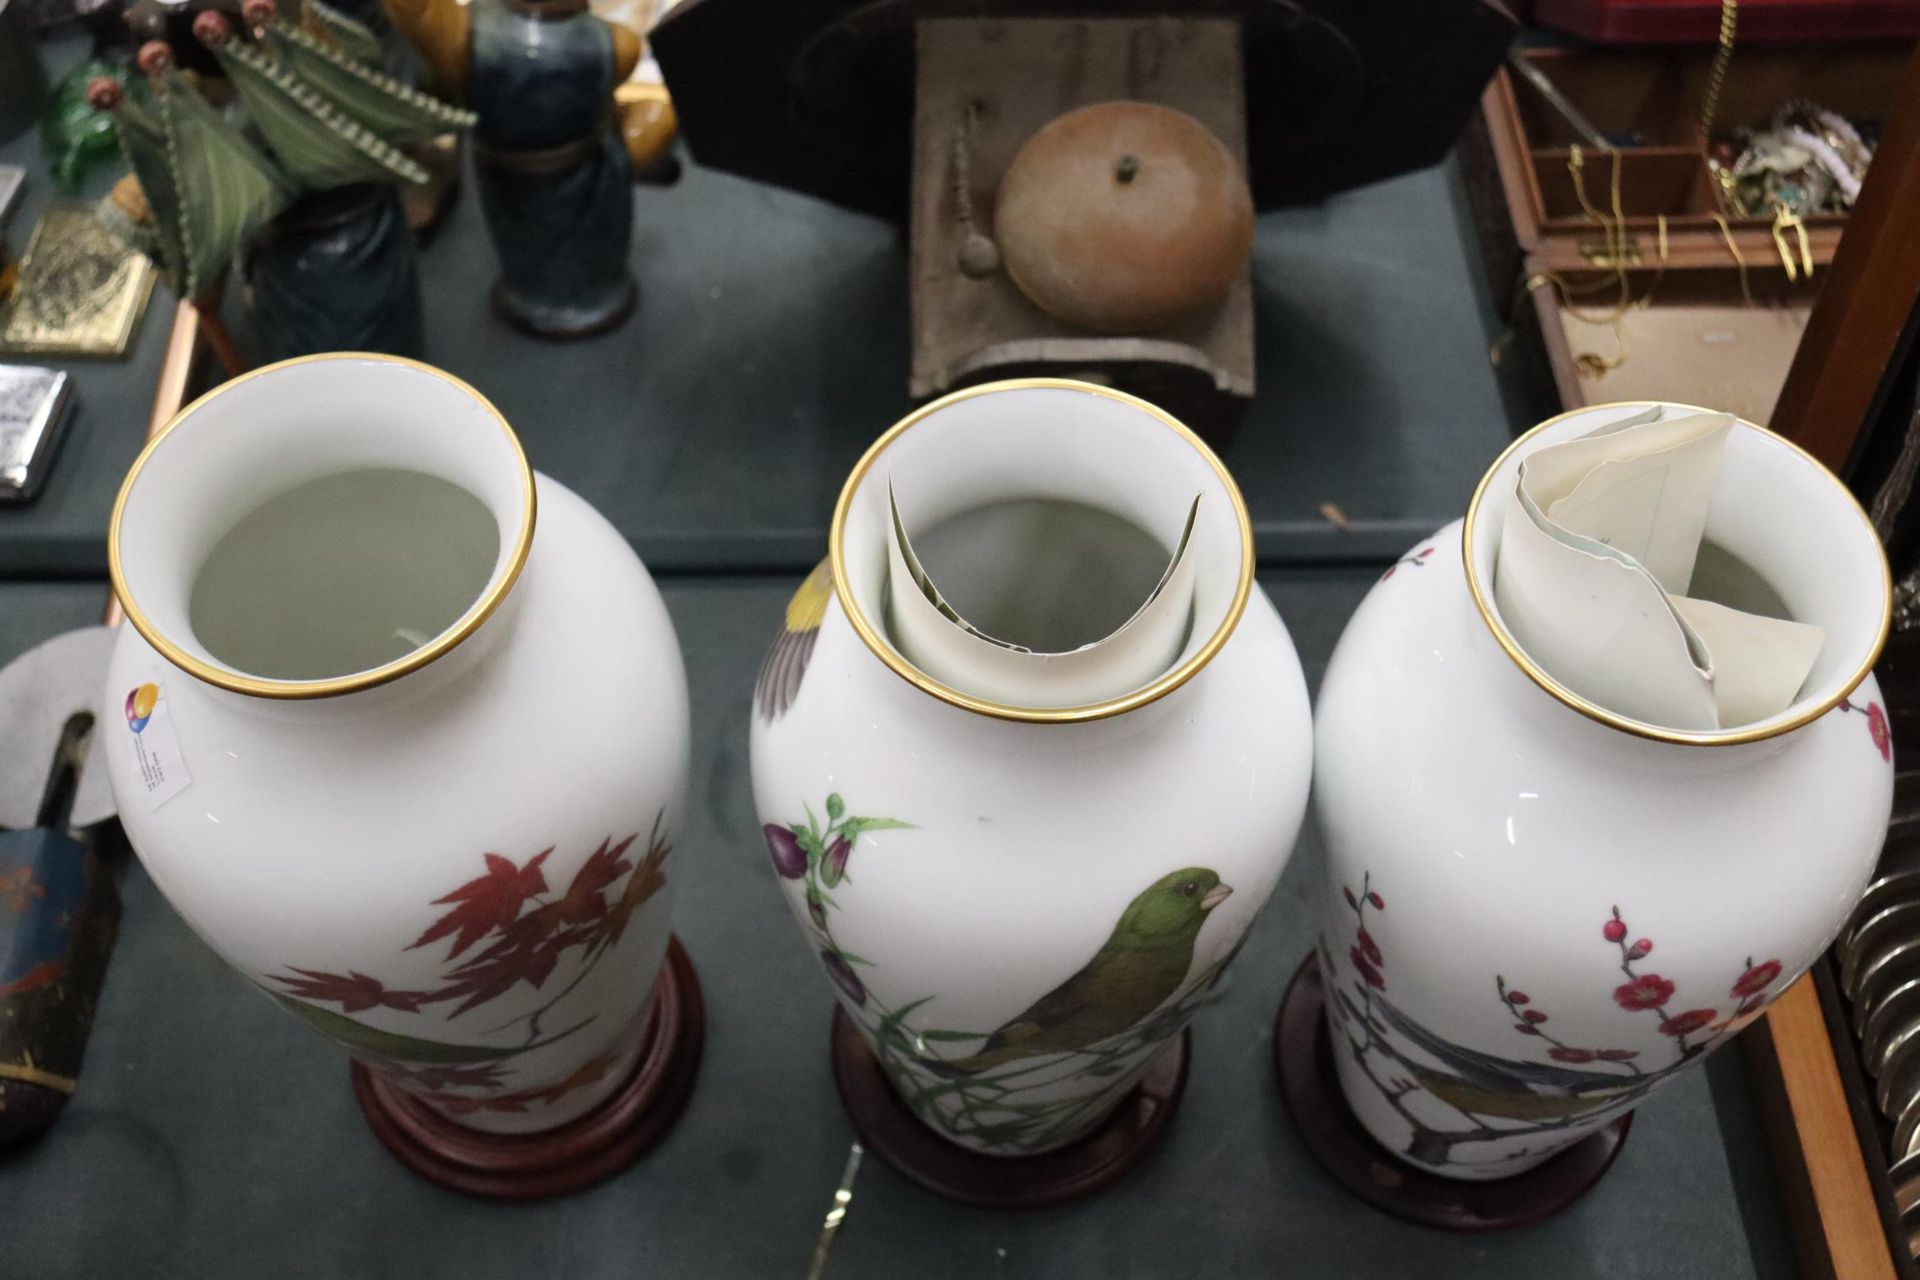 THREE LARGE FRANKLIN PORCELAIN VASES WITH JAPANESE CHARACTERS TO BASE AND WOODEN STANDS, THE HERALDS